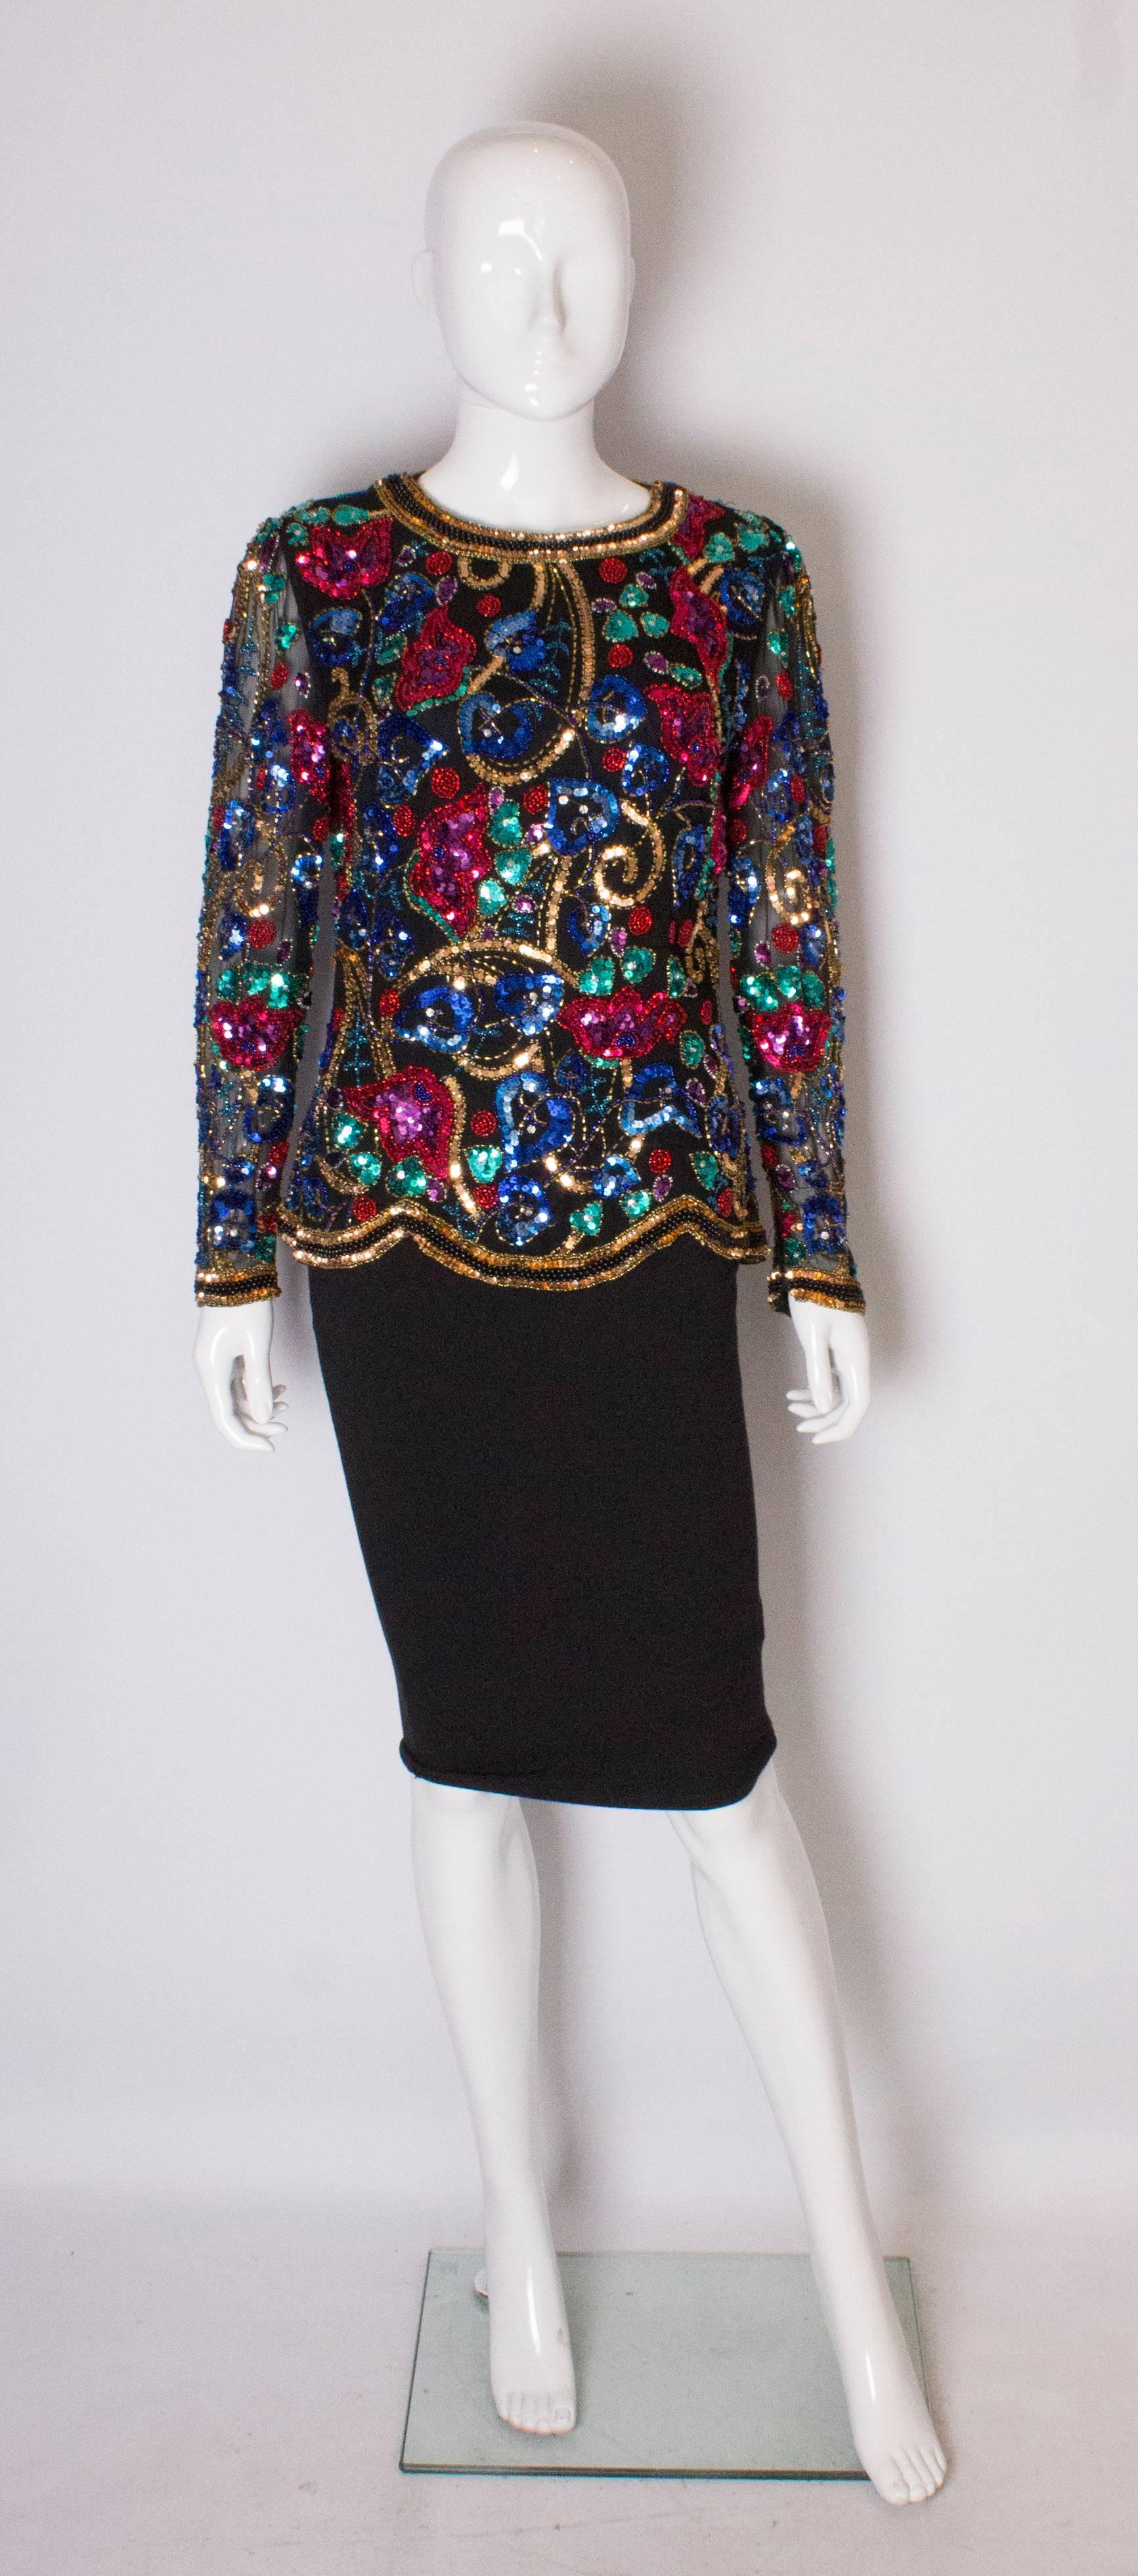 A pretty beaded evening top by Oleg Cassini Black Tie Line. The top has a black background with gold sequins areound the neck, hem and cuffs.The top  has a round neckline, central back zip, fully lined body and sheer sleeves. It is wonderfuly